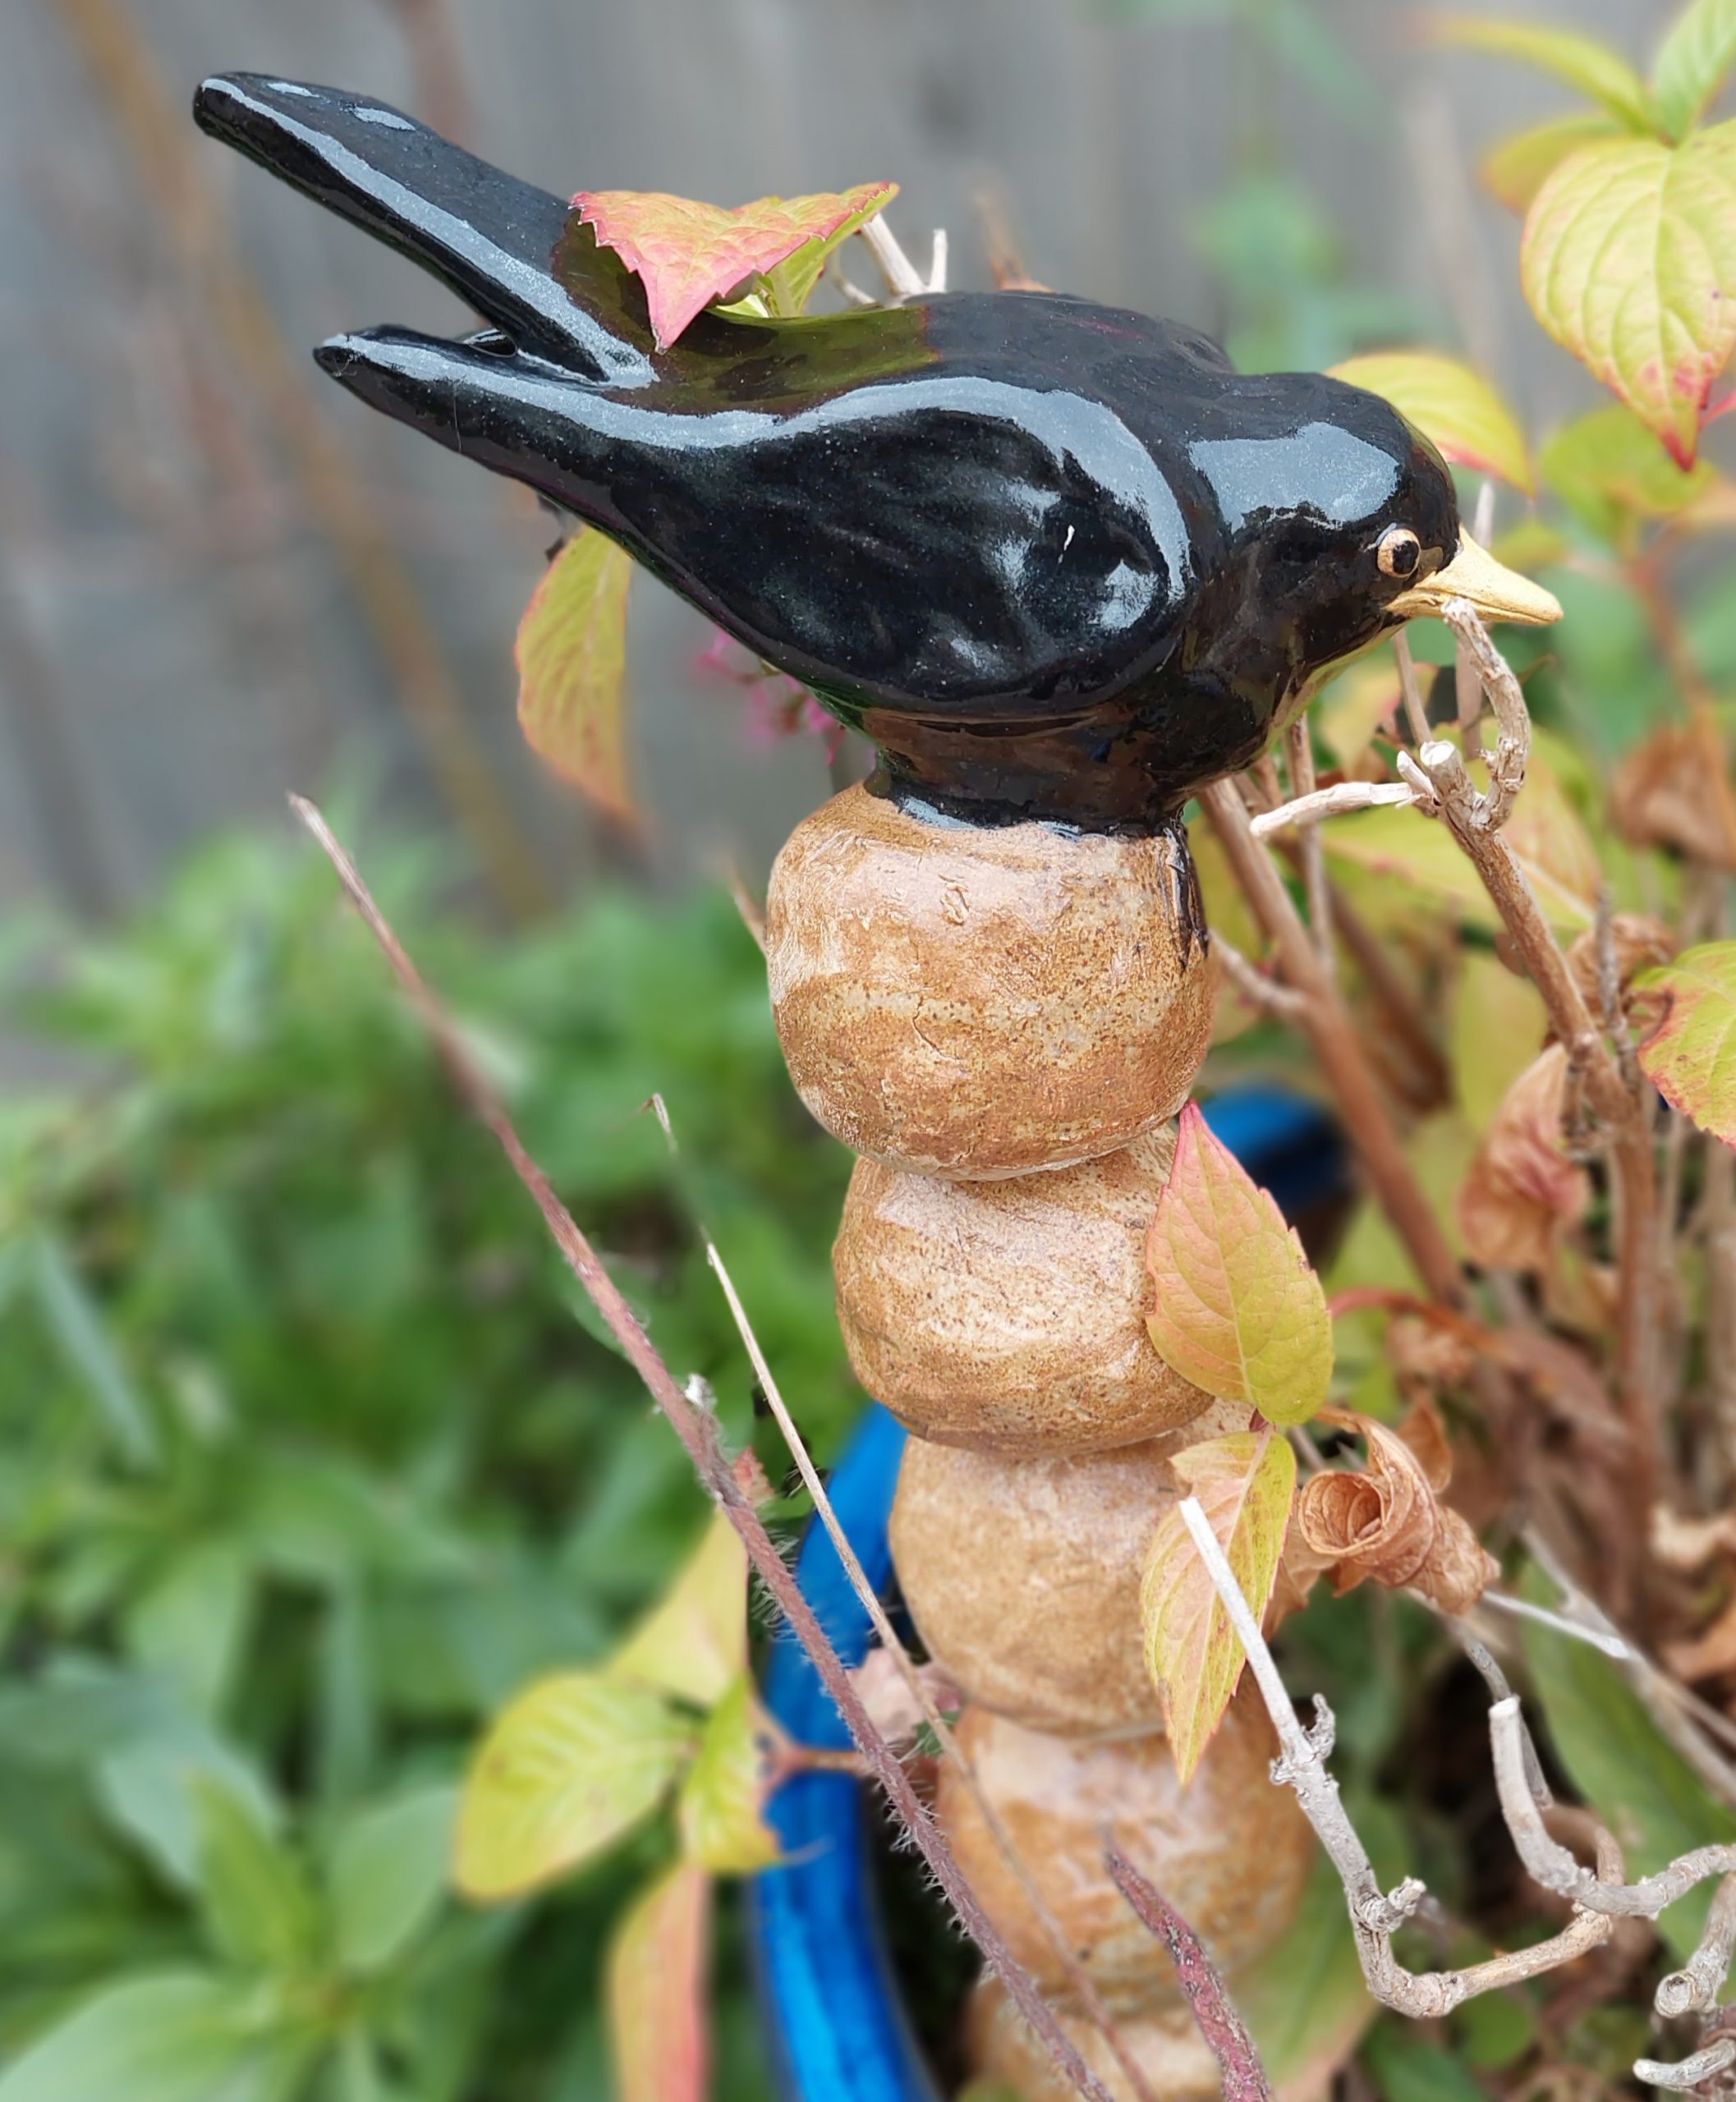 A decorative hand built stoneware blackbird on round stacking stones on a metal rod, placed in a plant pot.